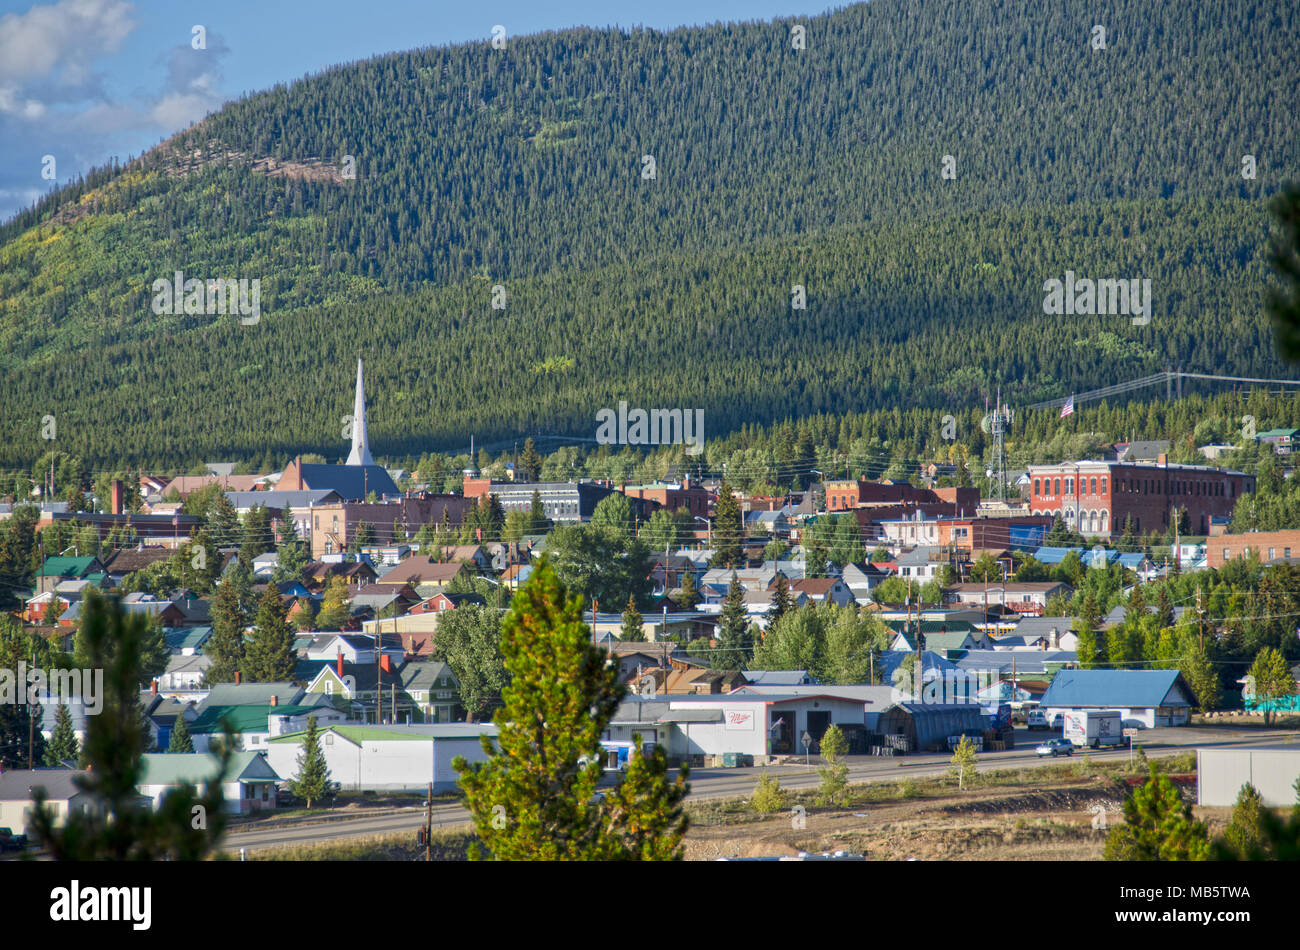 The skyline of Leadville, Colorado looks much the same as it did almost 100 years ago, with church steeples, an opera house and hundreds of Victorian  Stock Photo